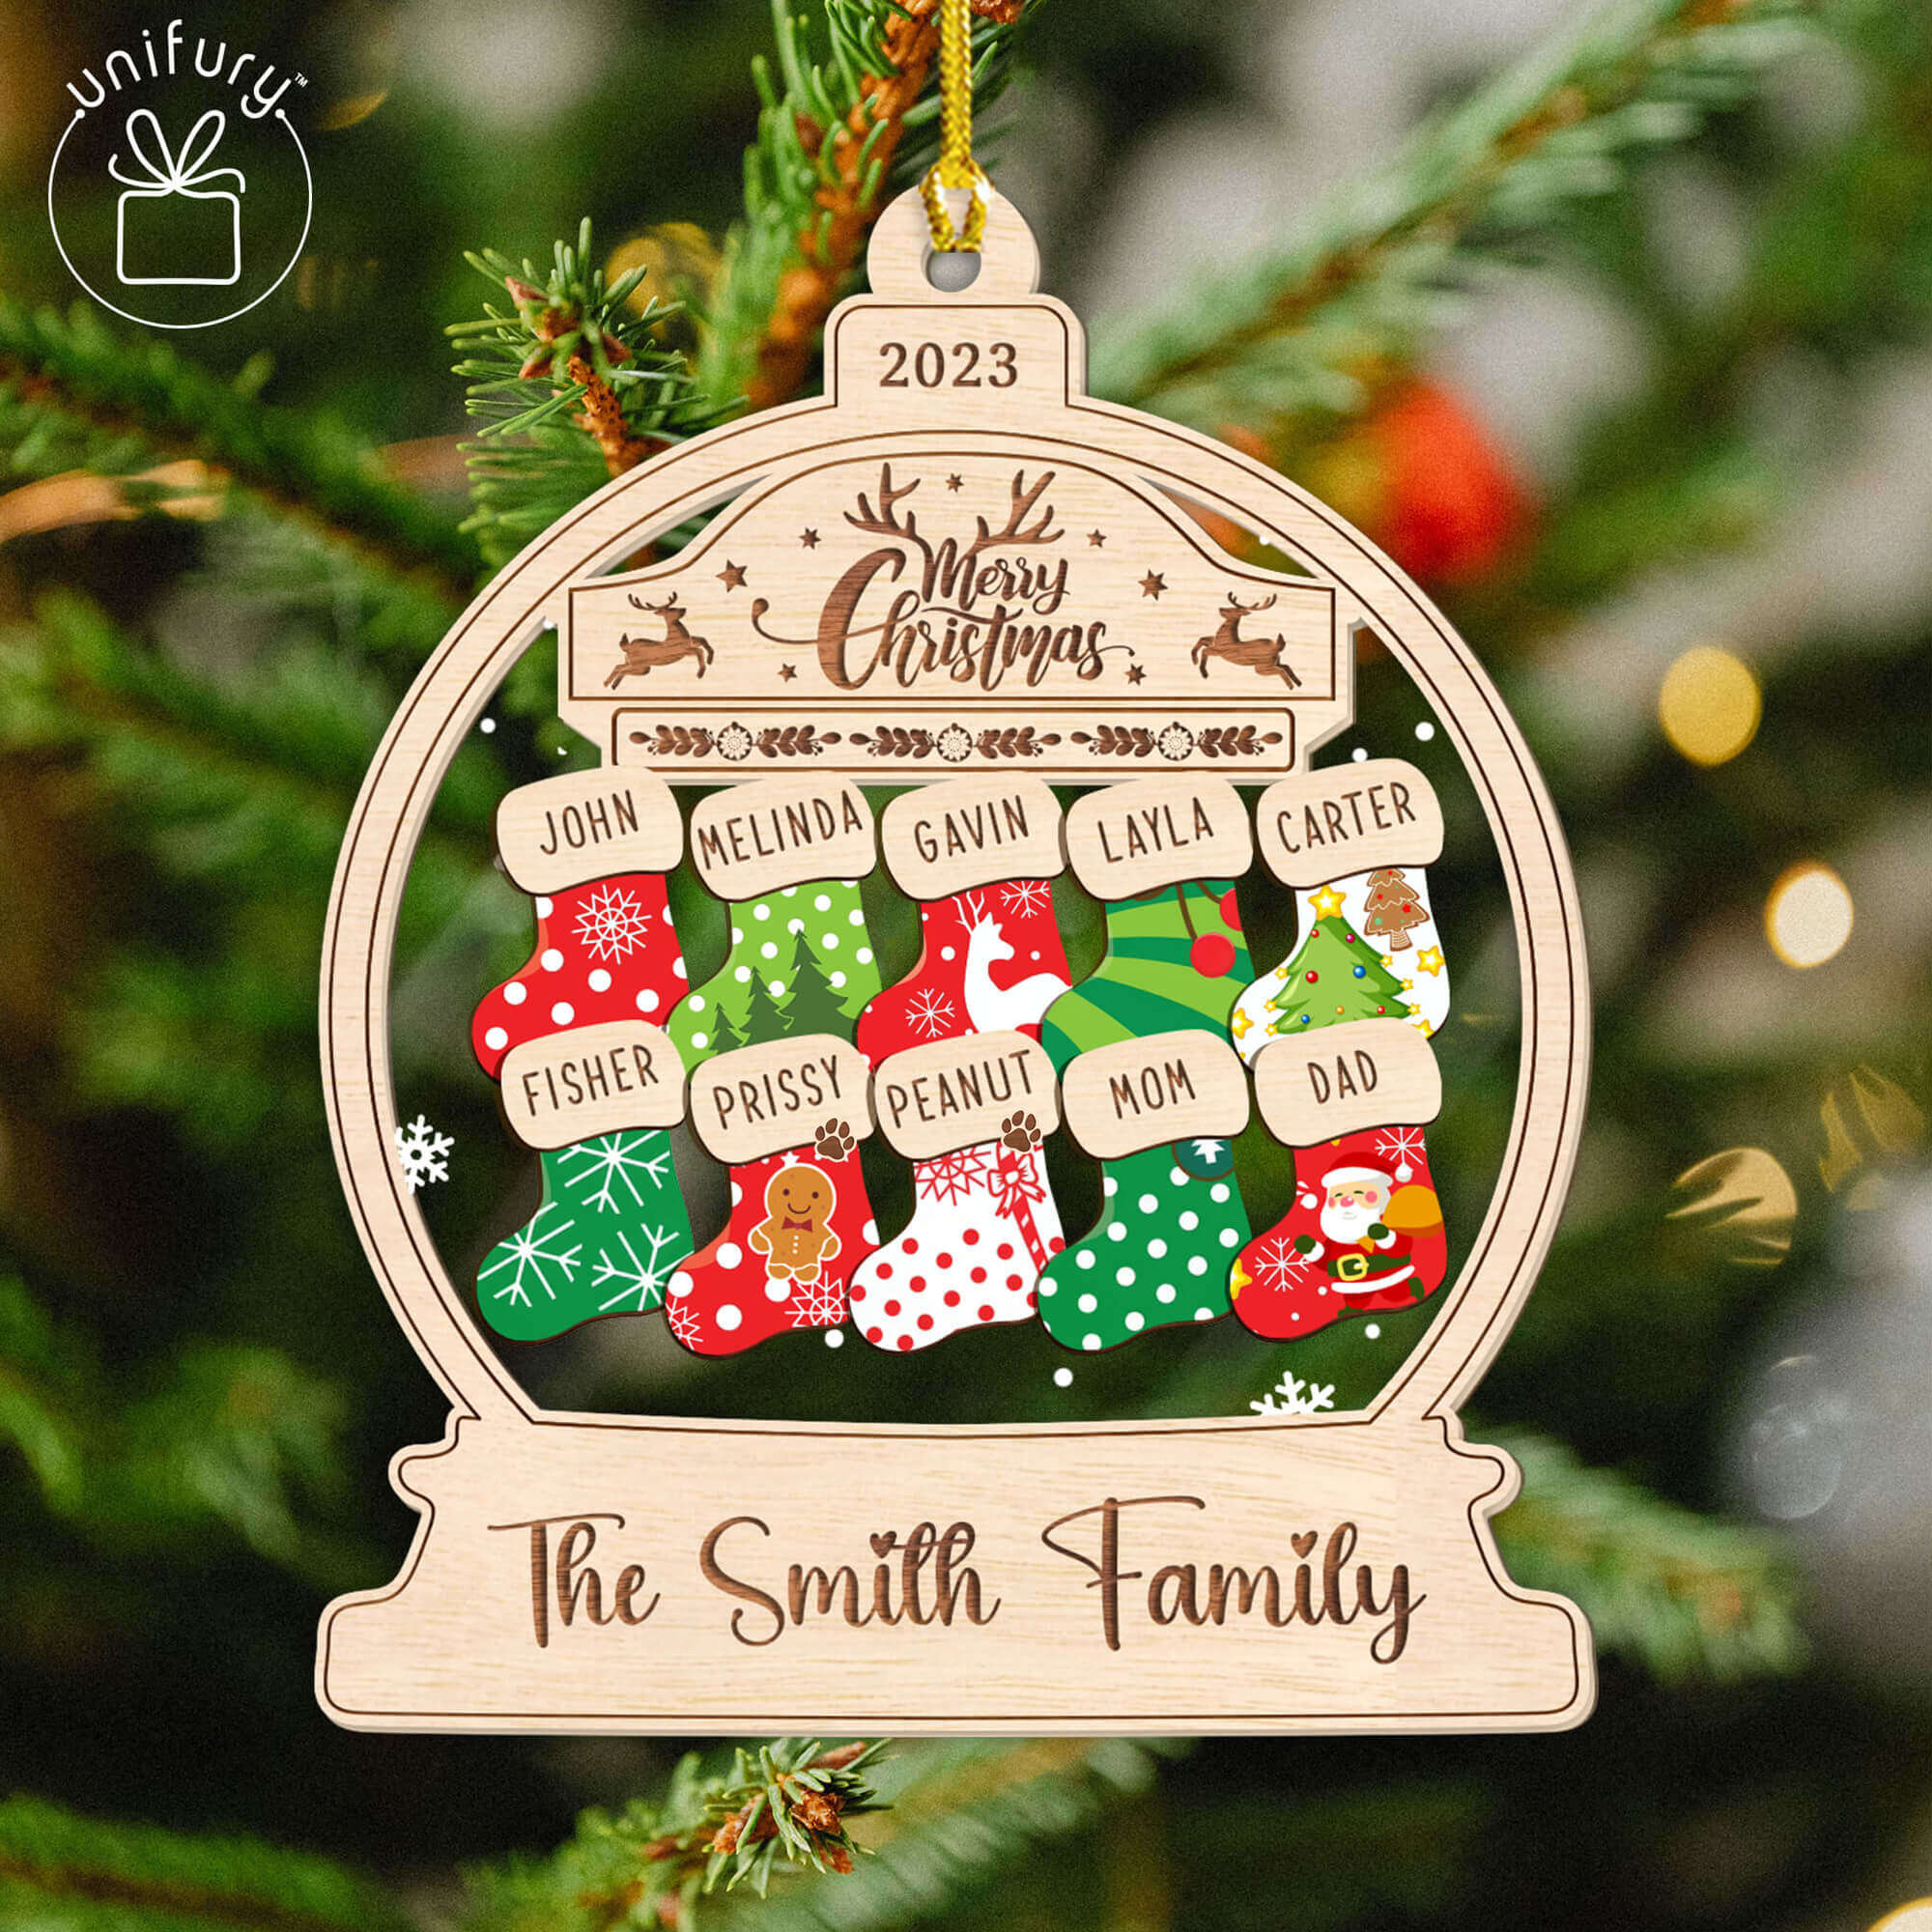 Our First Christmas as Grandparents 2023 Wreath Wood Ornament personalized  Gifts, Custom Message, Christmas, Holiday, Stocking Stuffers 